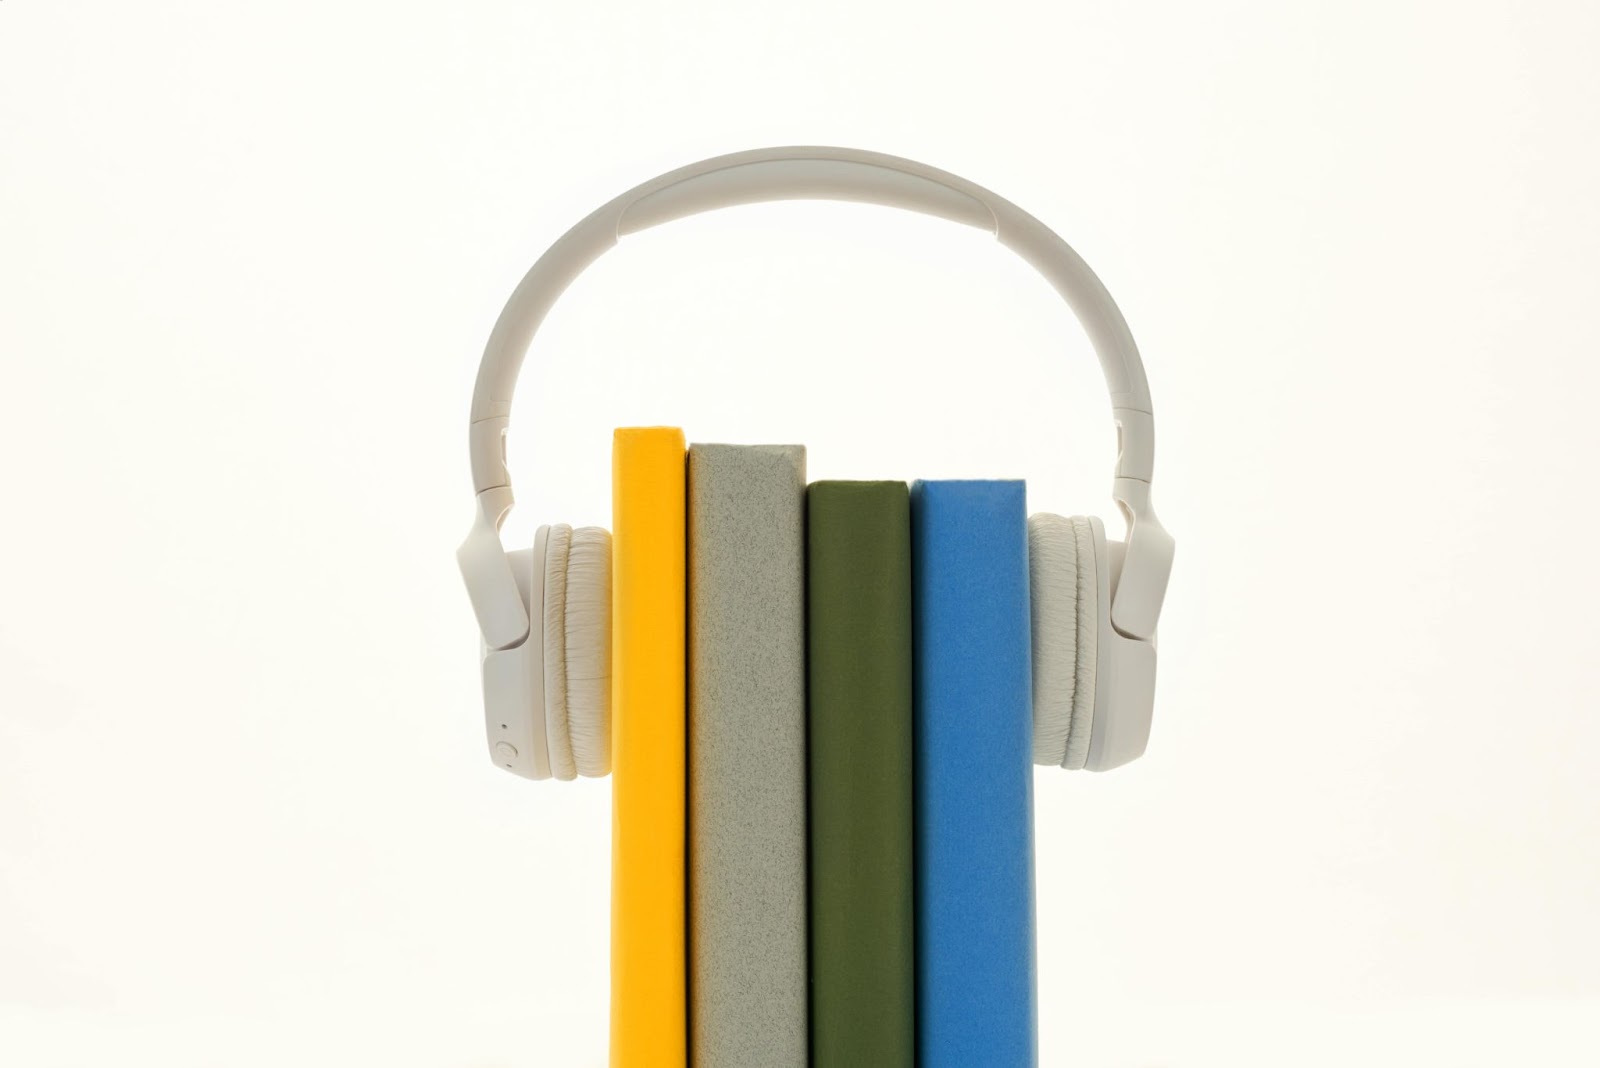 An image of 4 books "wearing" a set of over-ear headphones